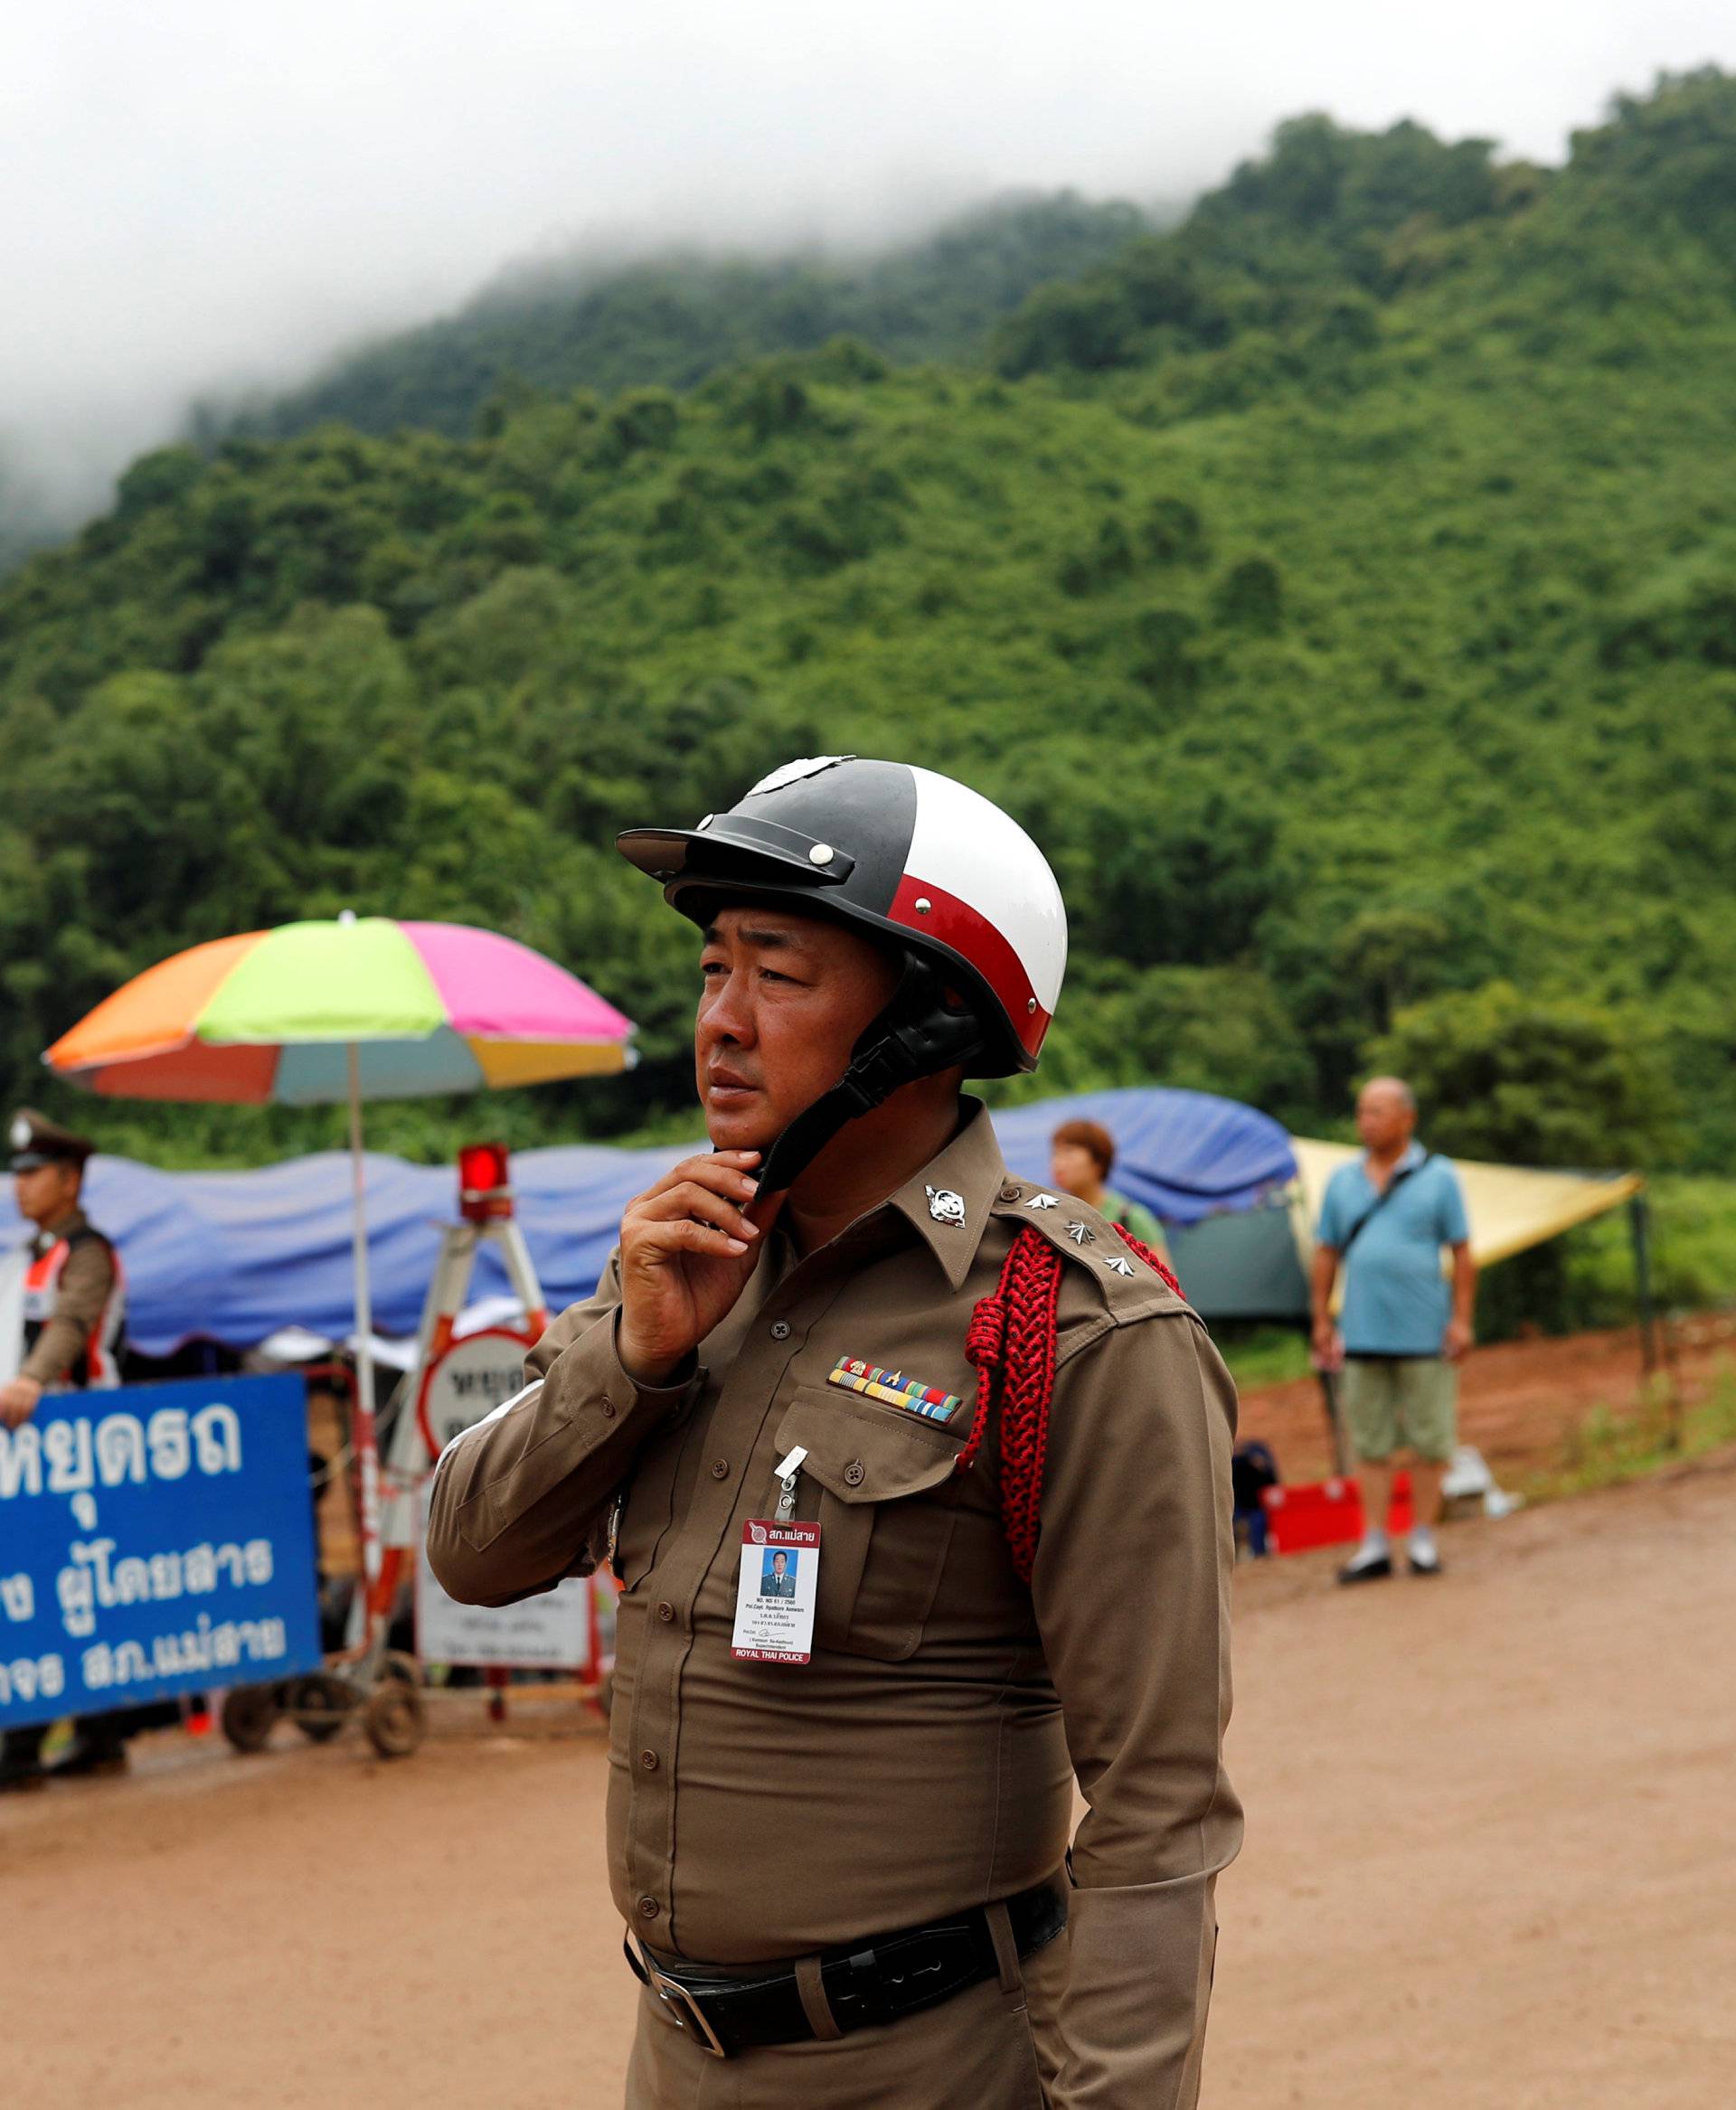 A police officerstands guard at a checkpoint outside the Tham Luang cave complex after Thailand's government instructed members of the media to move out urgently, in the northern province of Chiang Rai